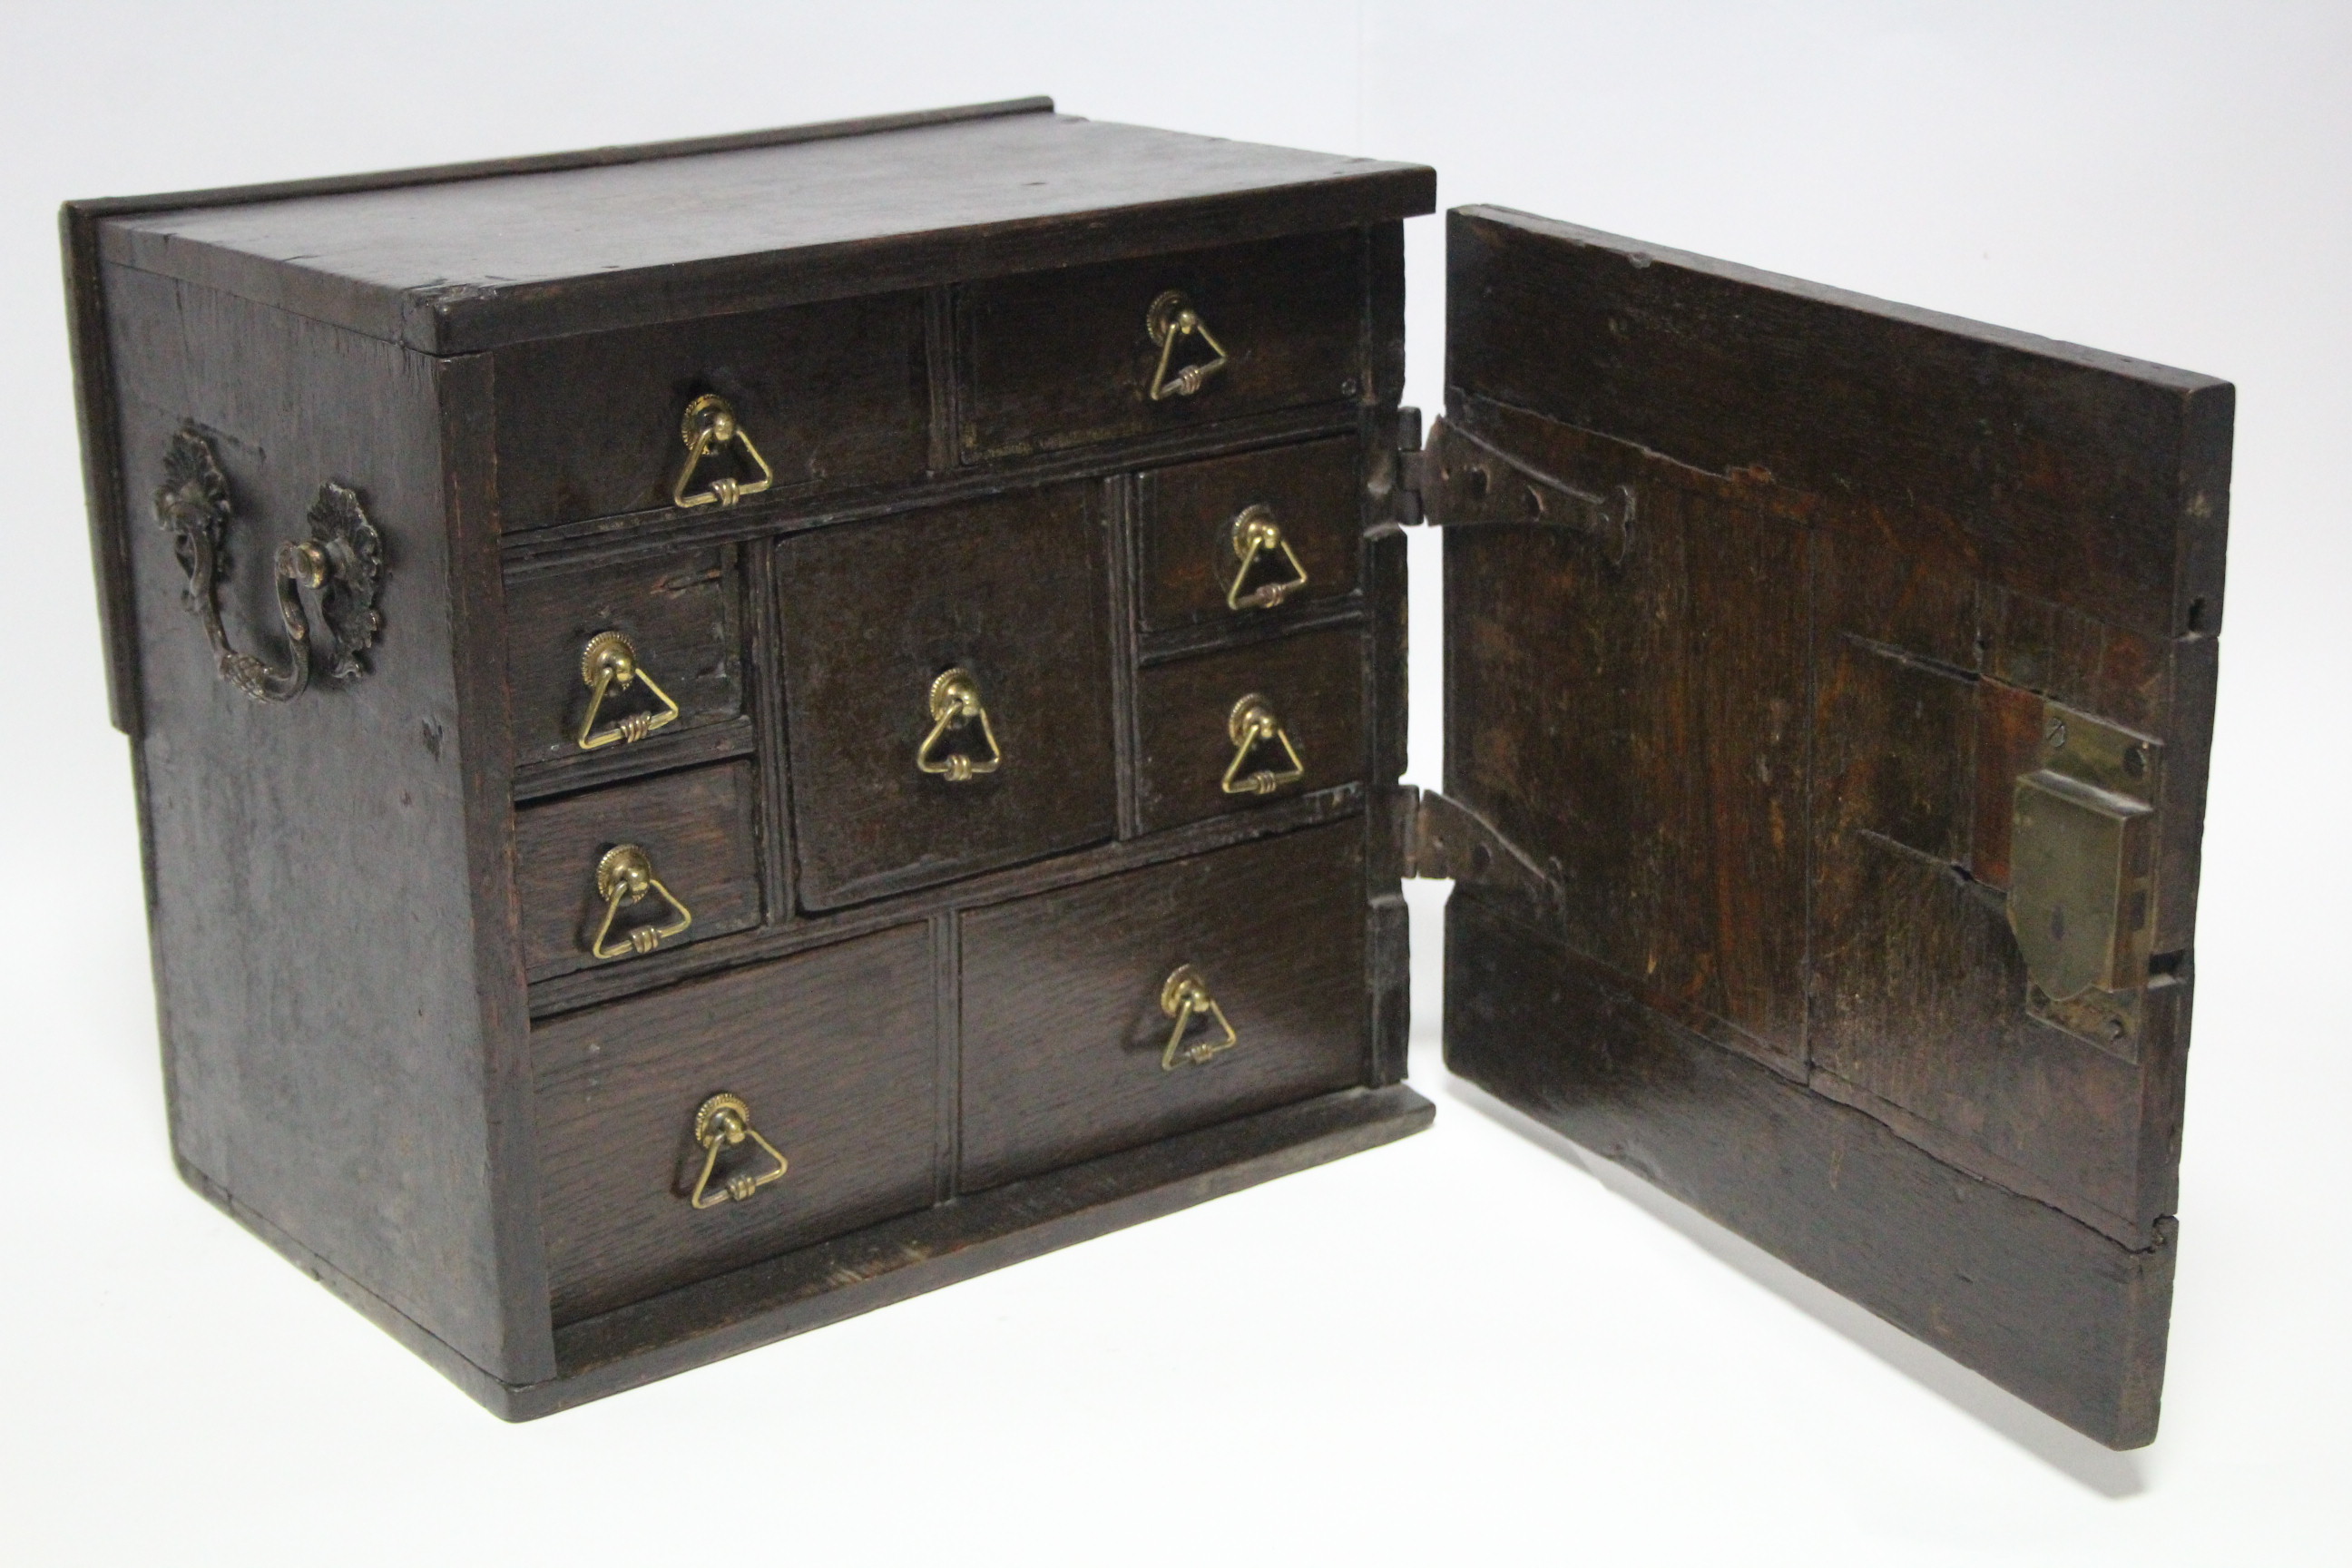 A late 17th/early 18th century oak small portable chest fitted with an arrangement of nine small